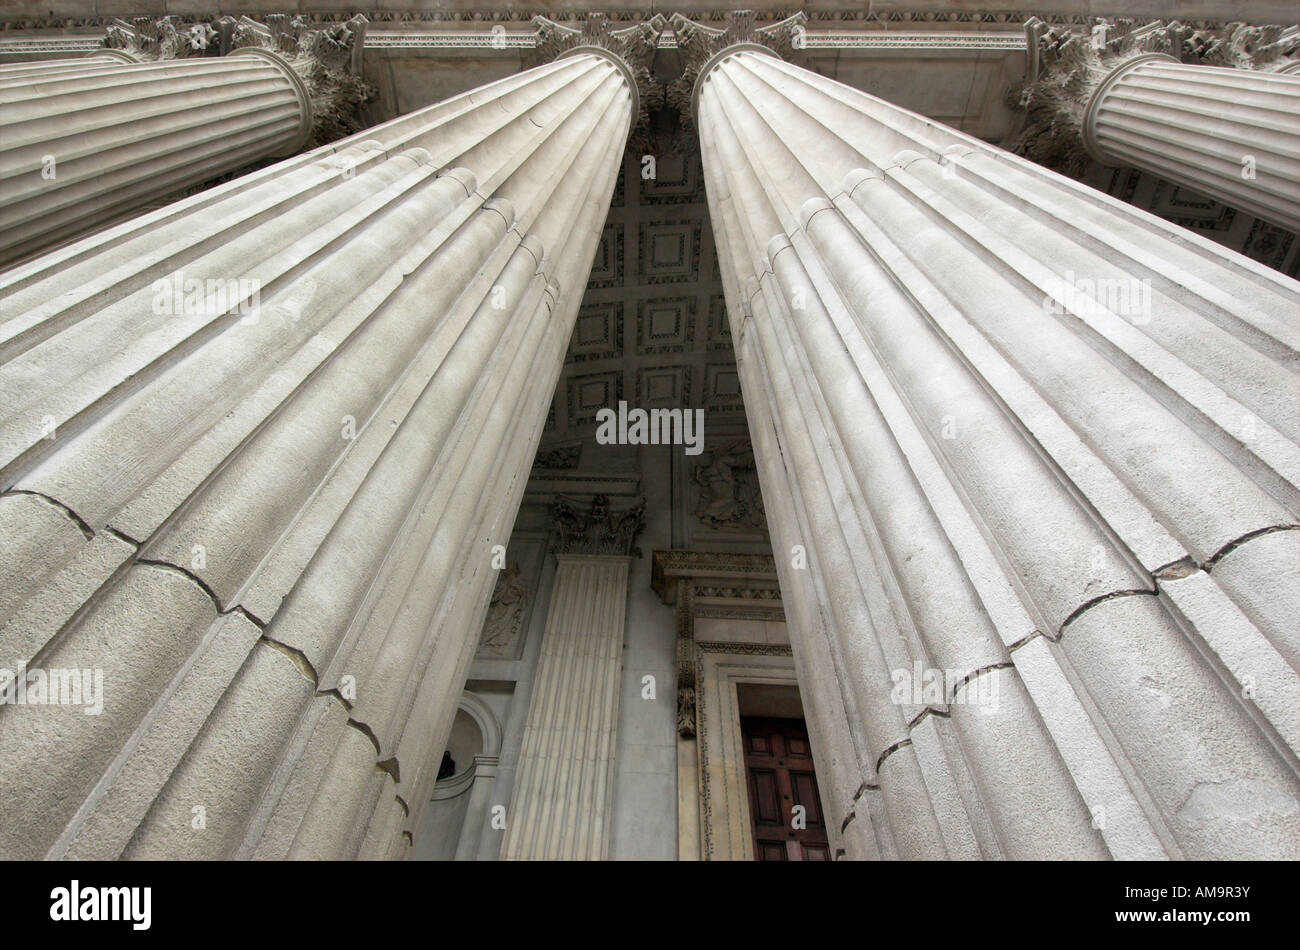 Looking up at the columns of St Pauls in London Stock Photo